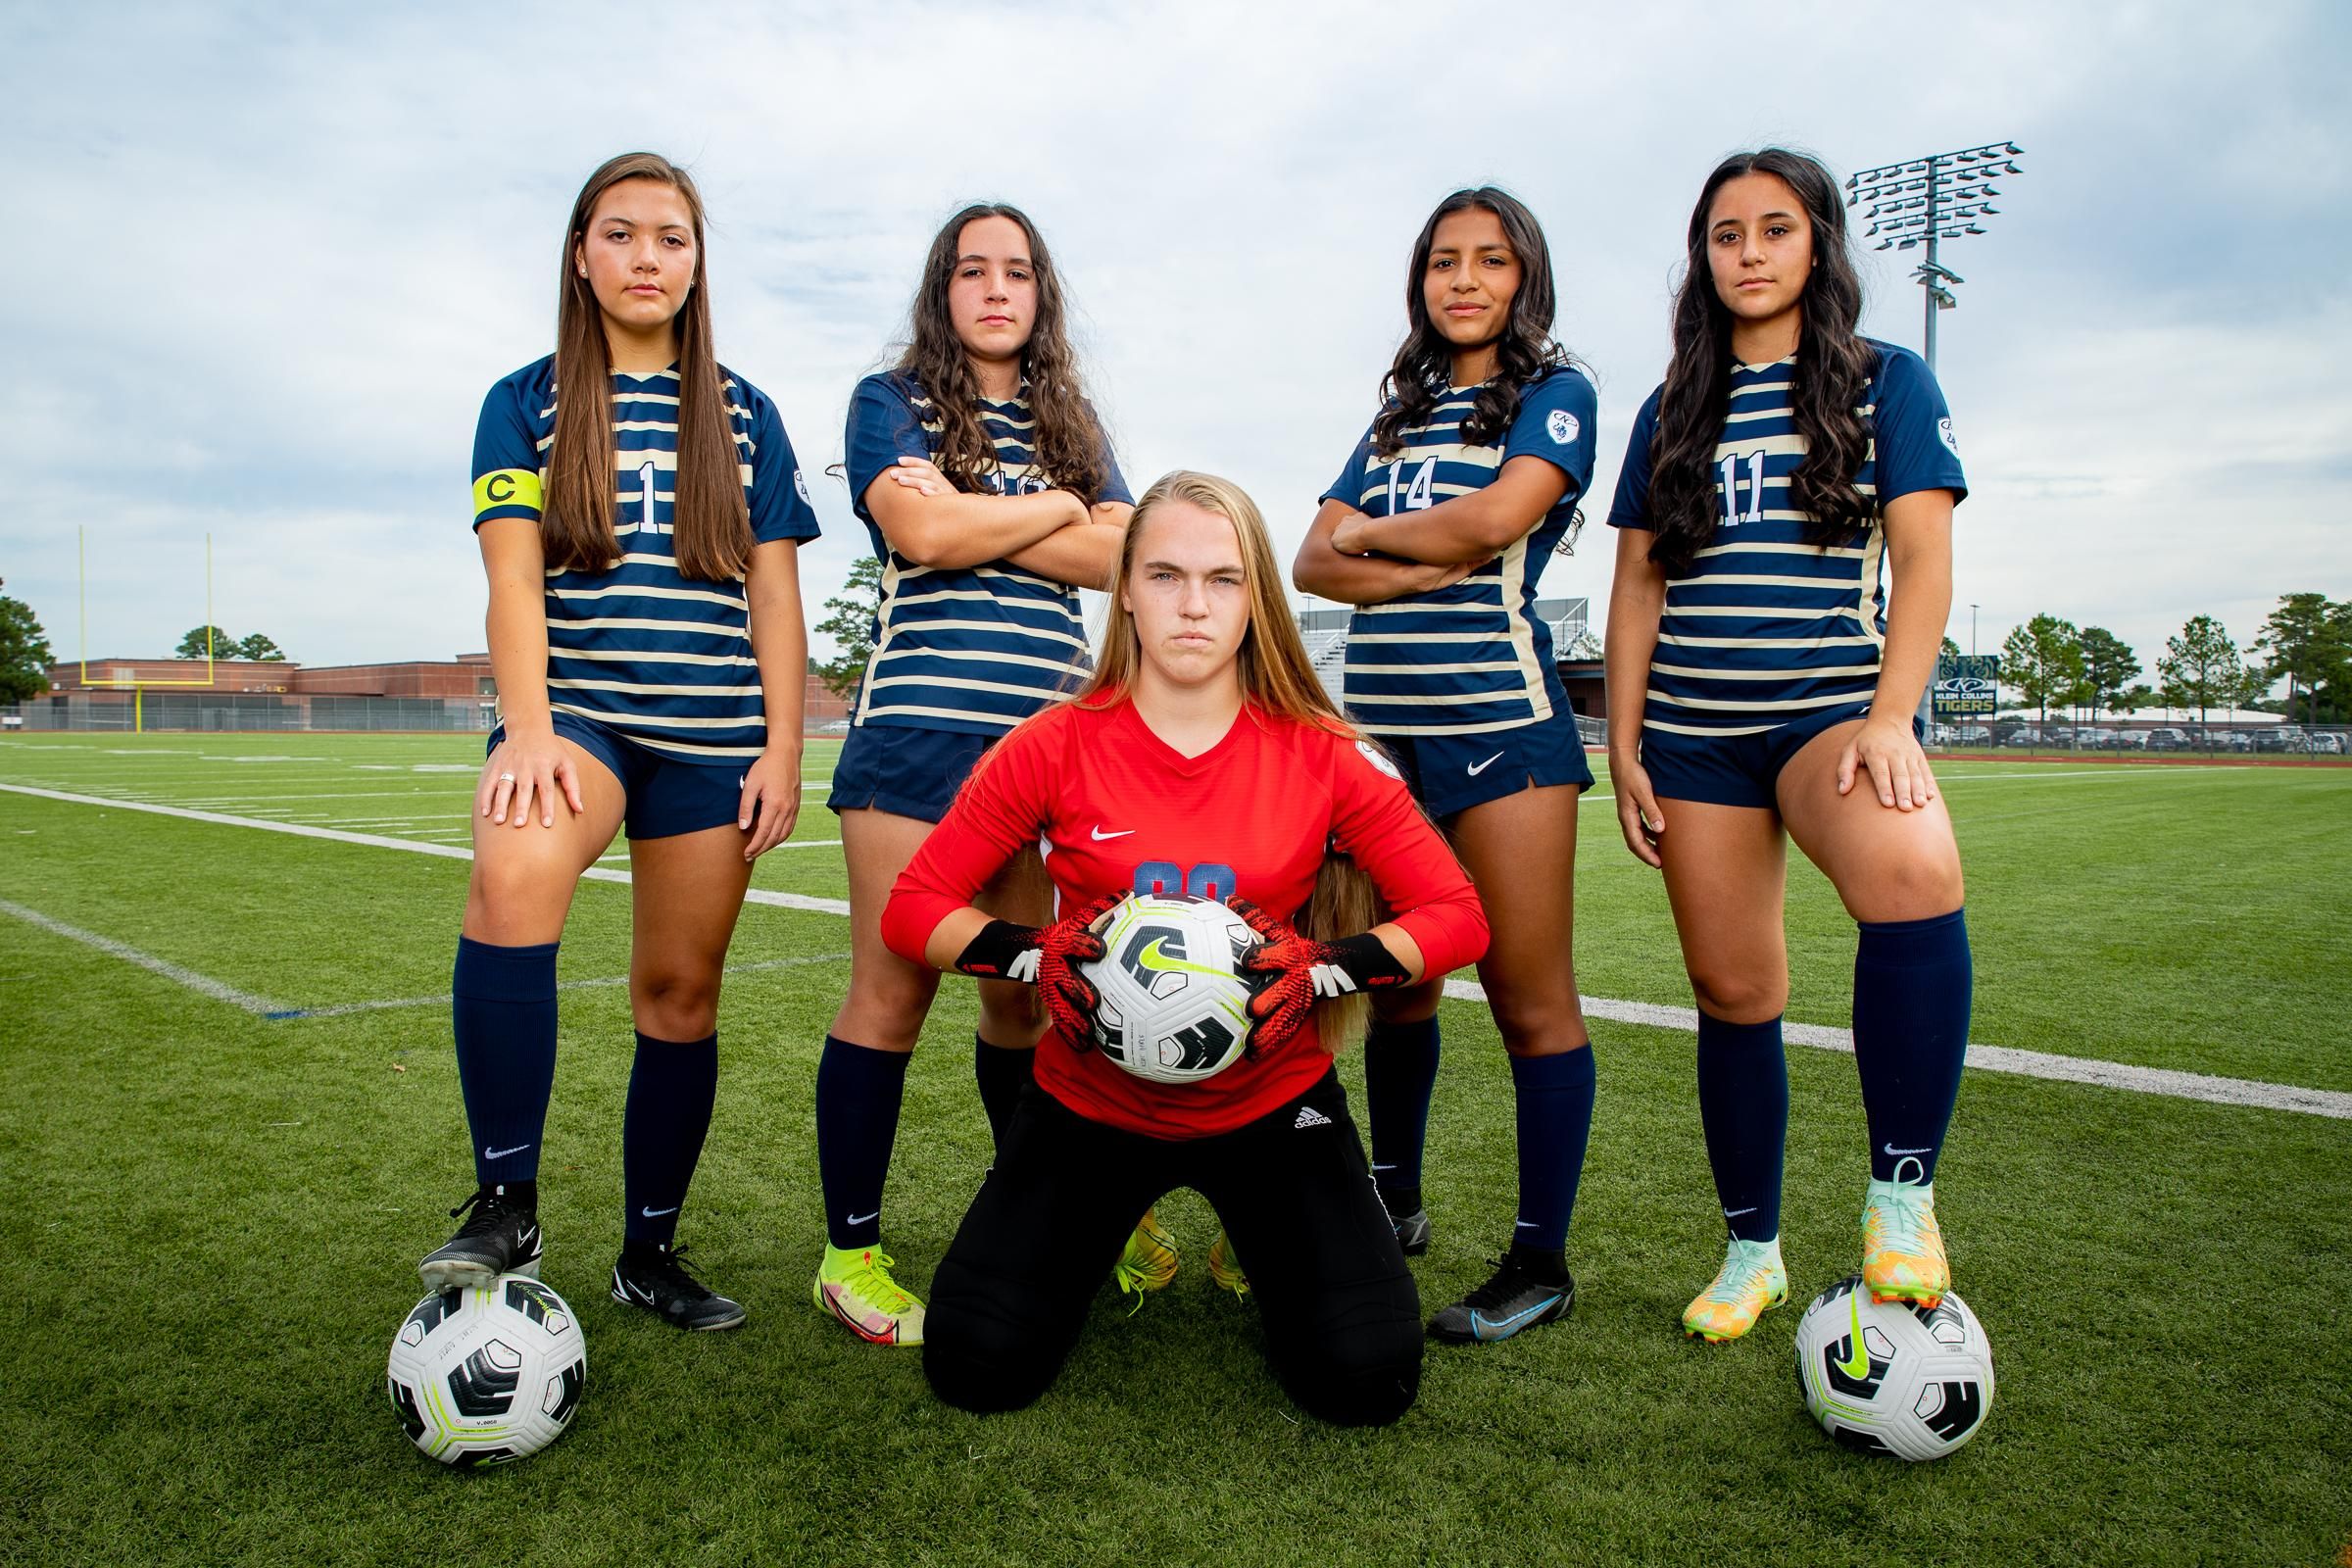 https://www.vype.com/media-library/less-than-p-greater-than-klein-collins-girls-soccer-less-than-p-greater-than.jpg?id=32372572